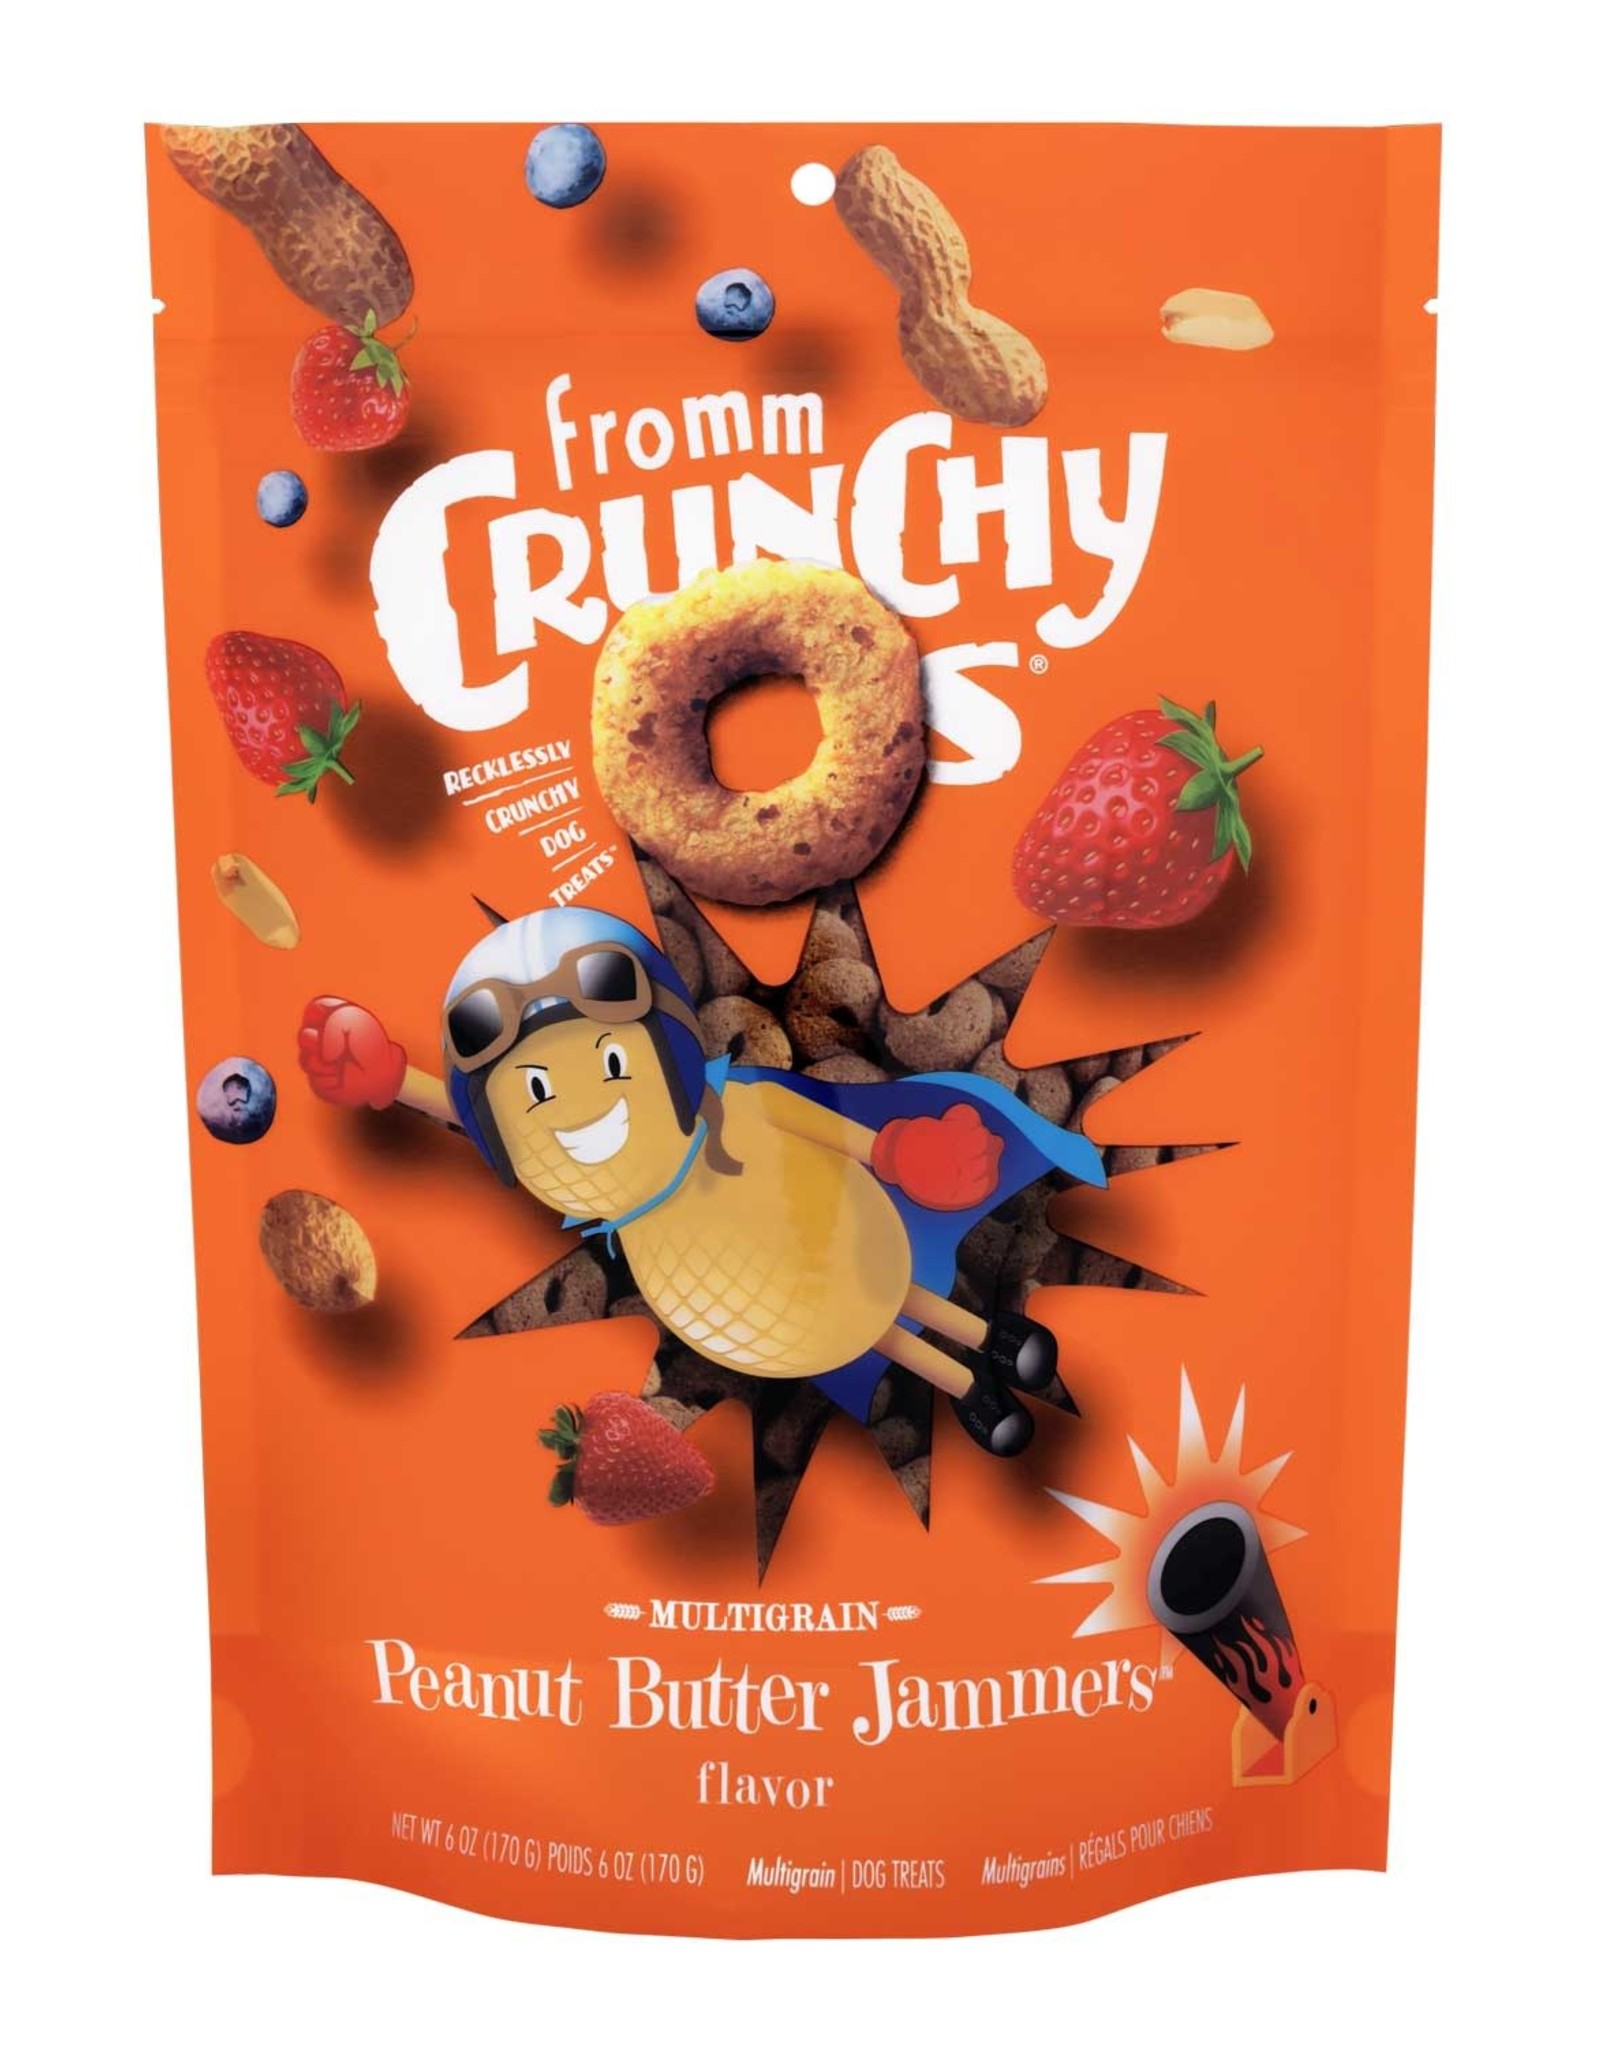 Fromm Fromm Crunchy O's: PB Jammers, 6 oz